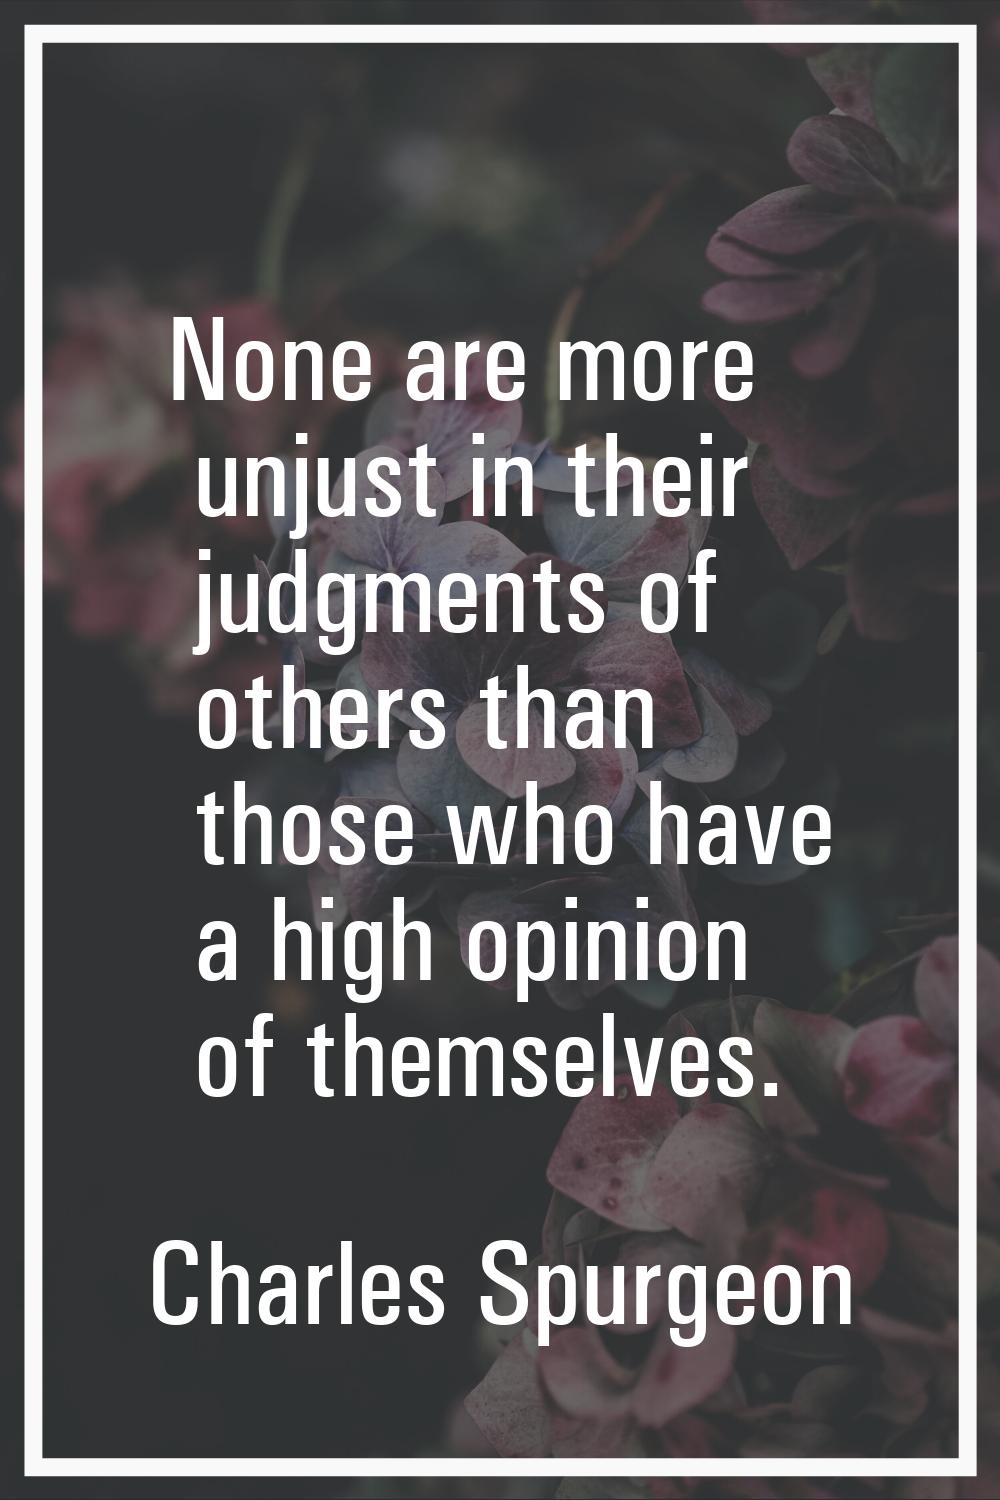 None are more unjust in their judgments of others than those who have a high opinion of themselves.